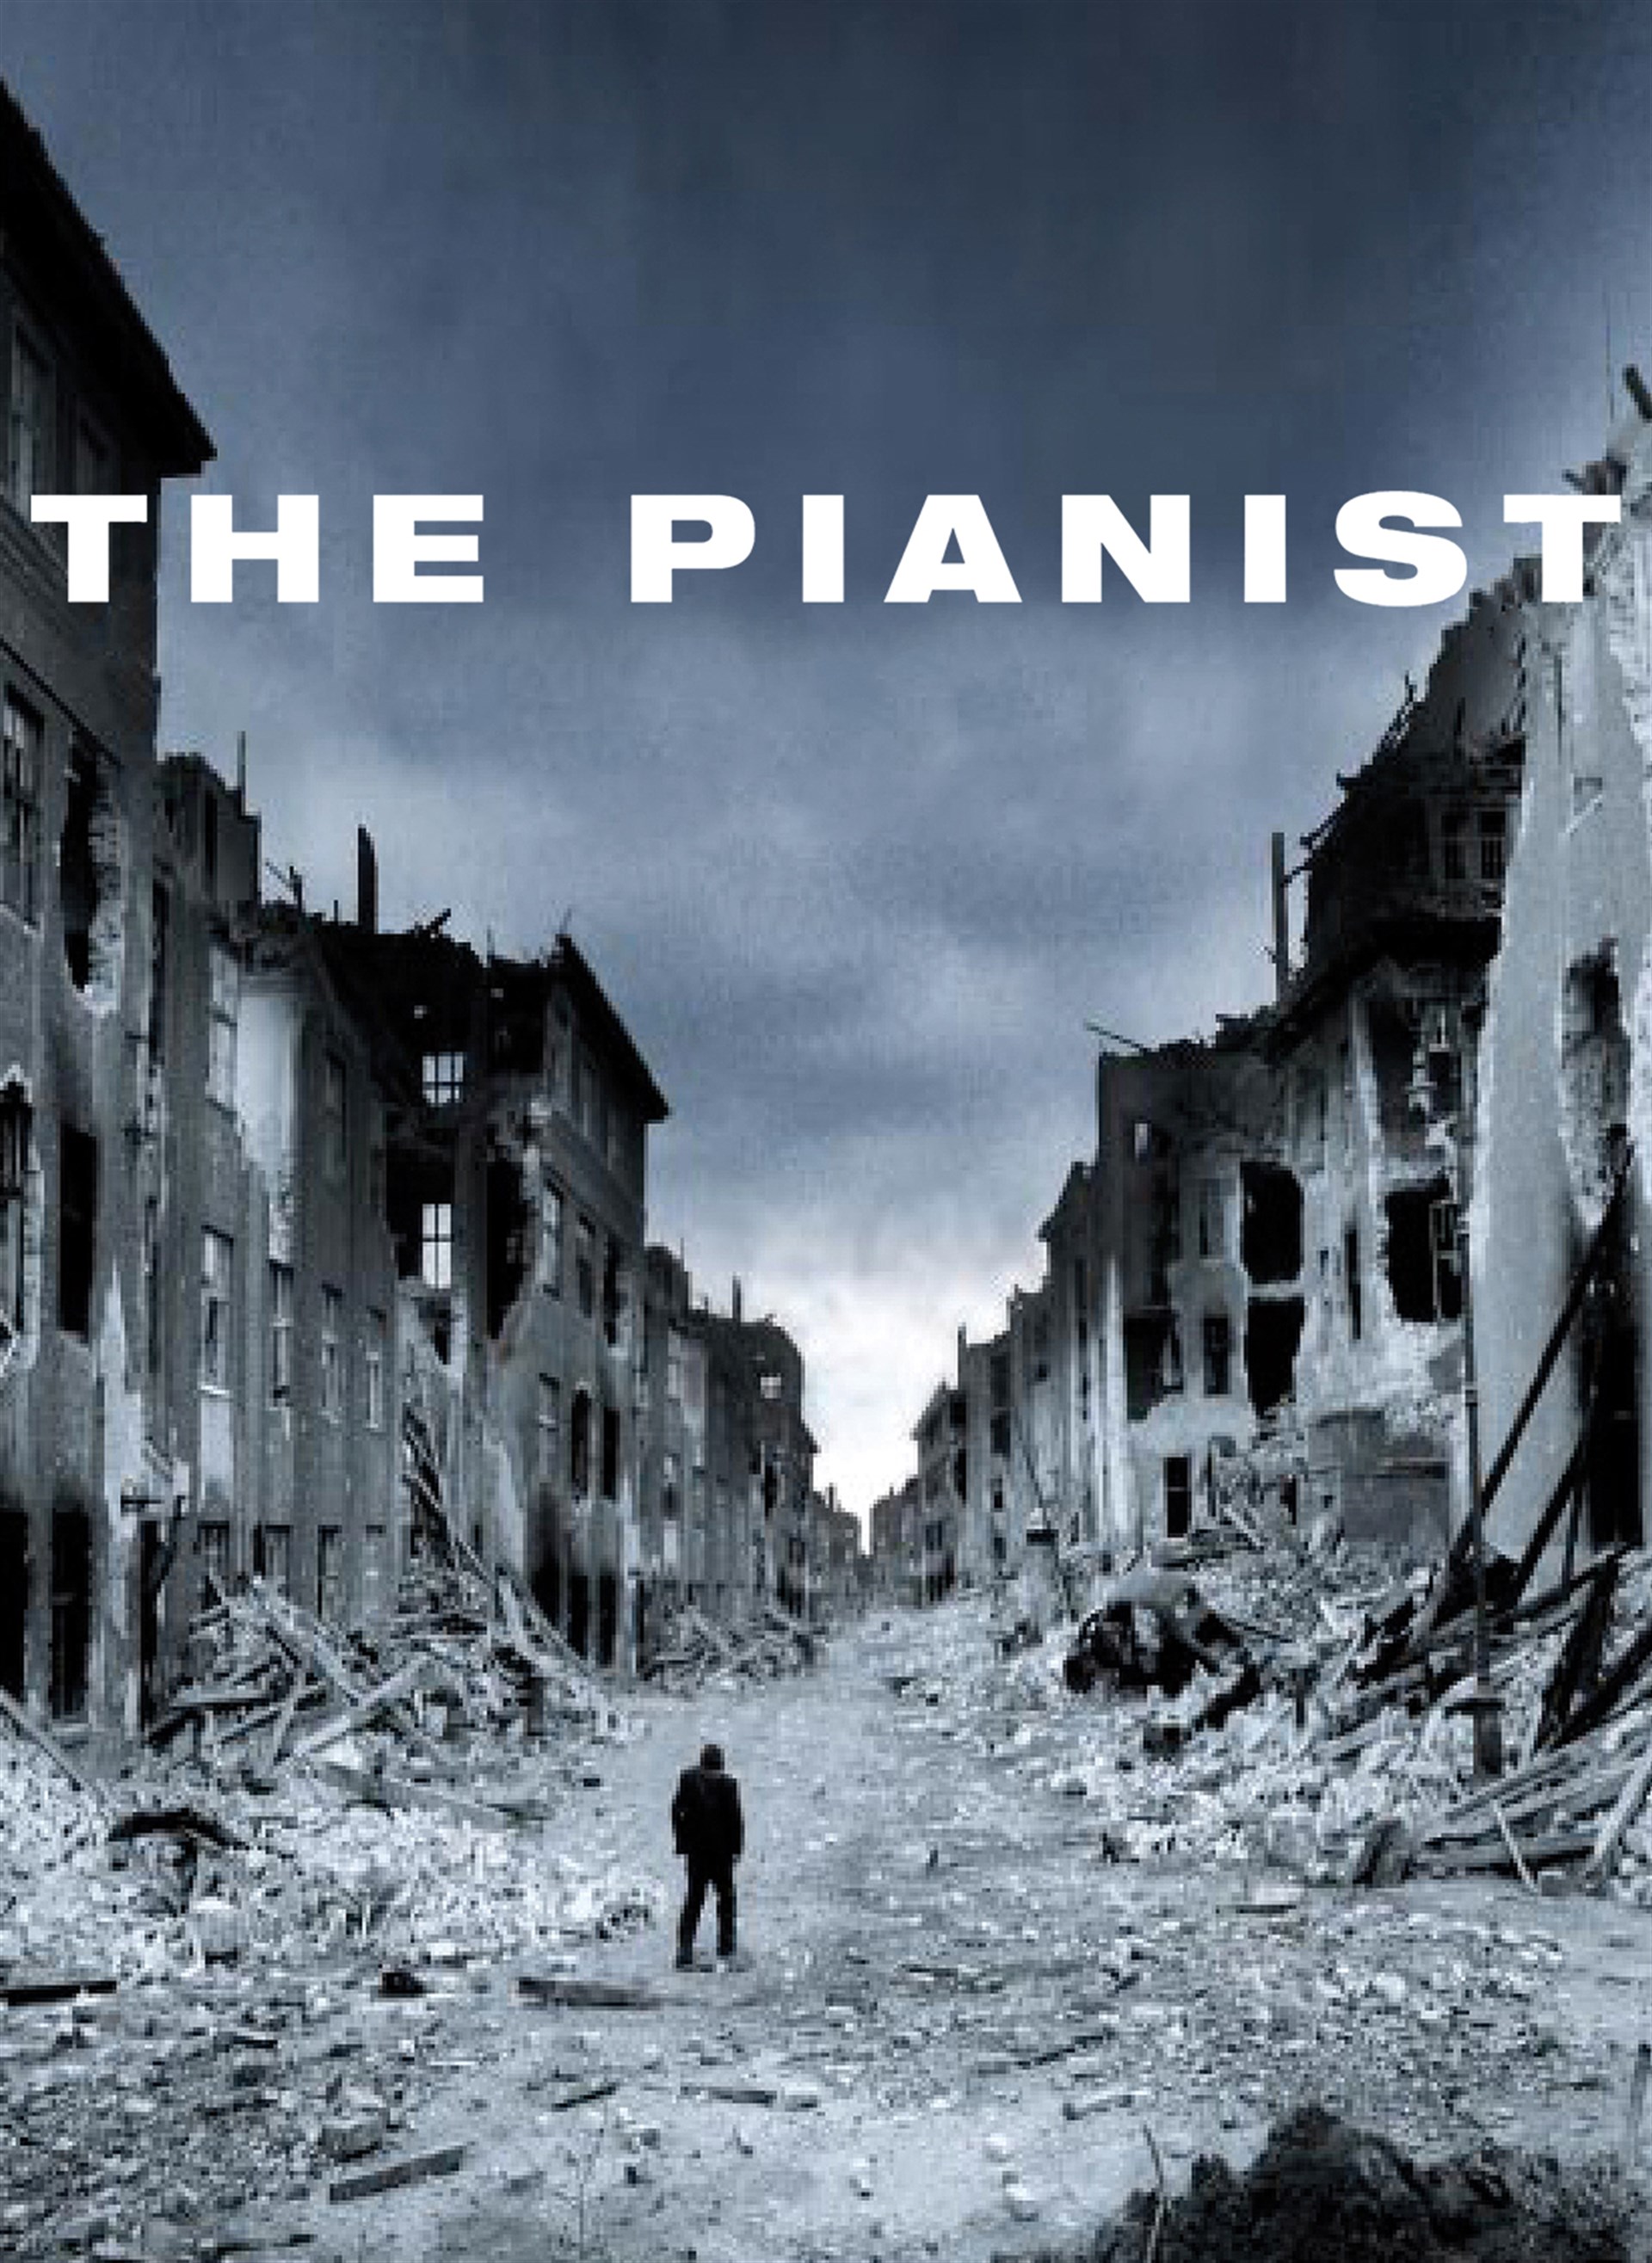 ashley ashmore recommends The Pianist English Subtitles